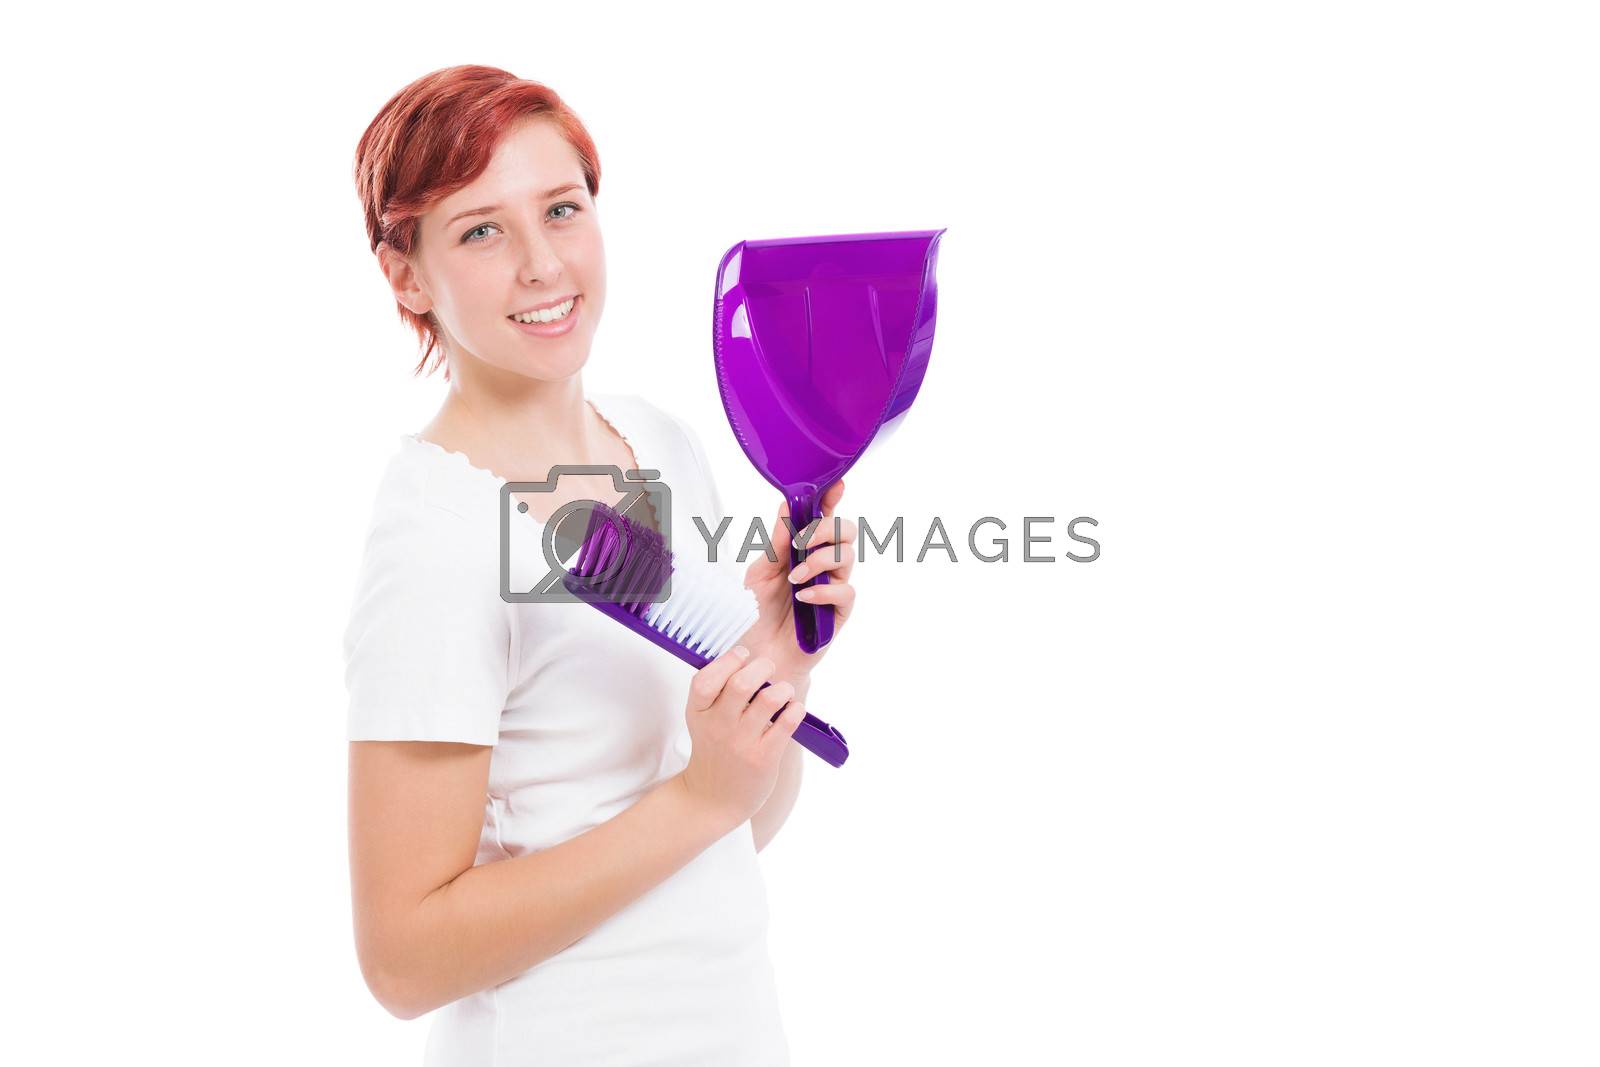 Royalty free image of happy woman with brush and shovel by RobStark